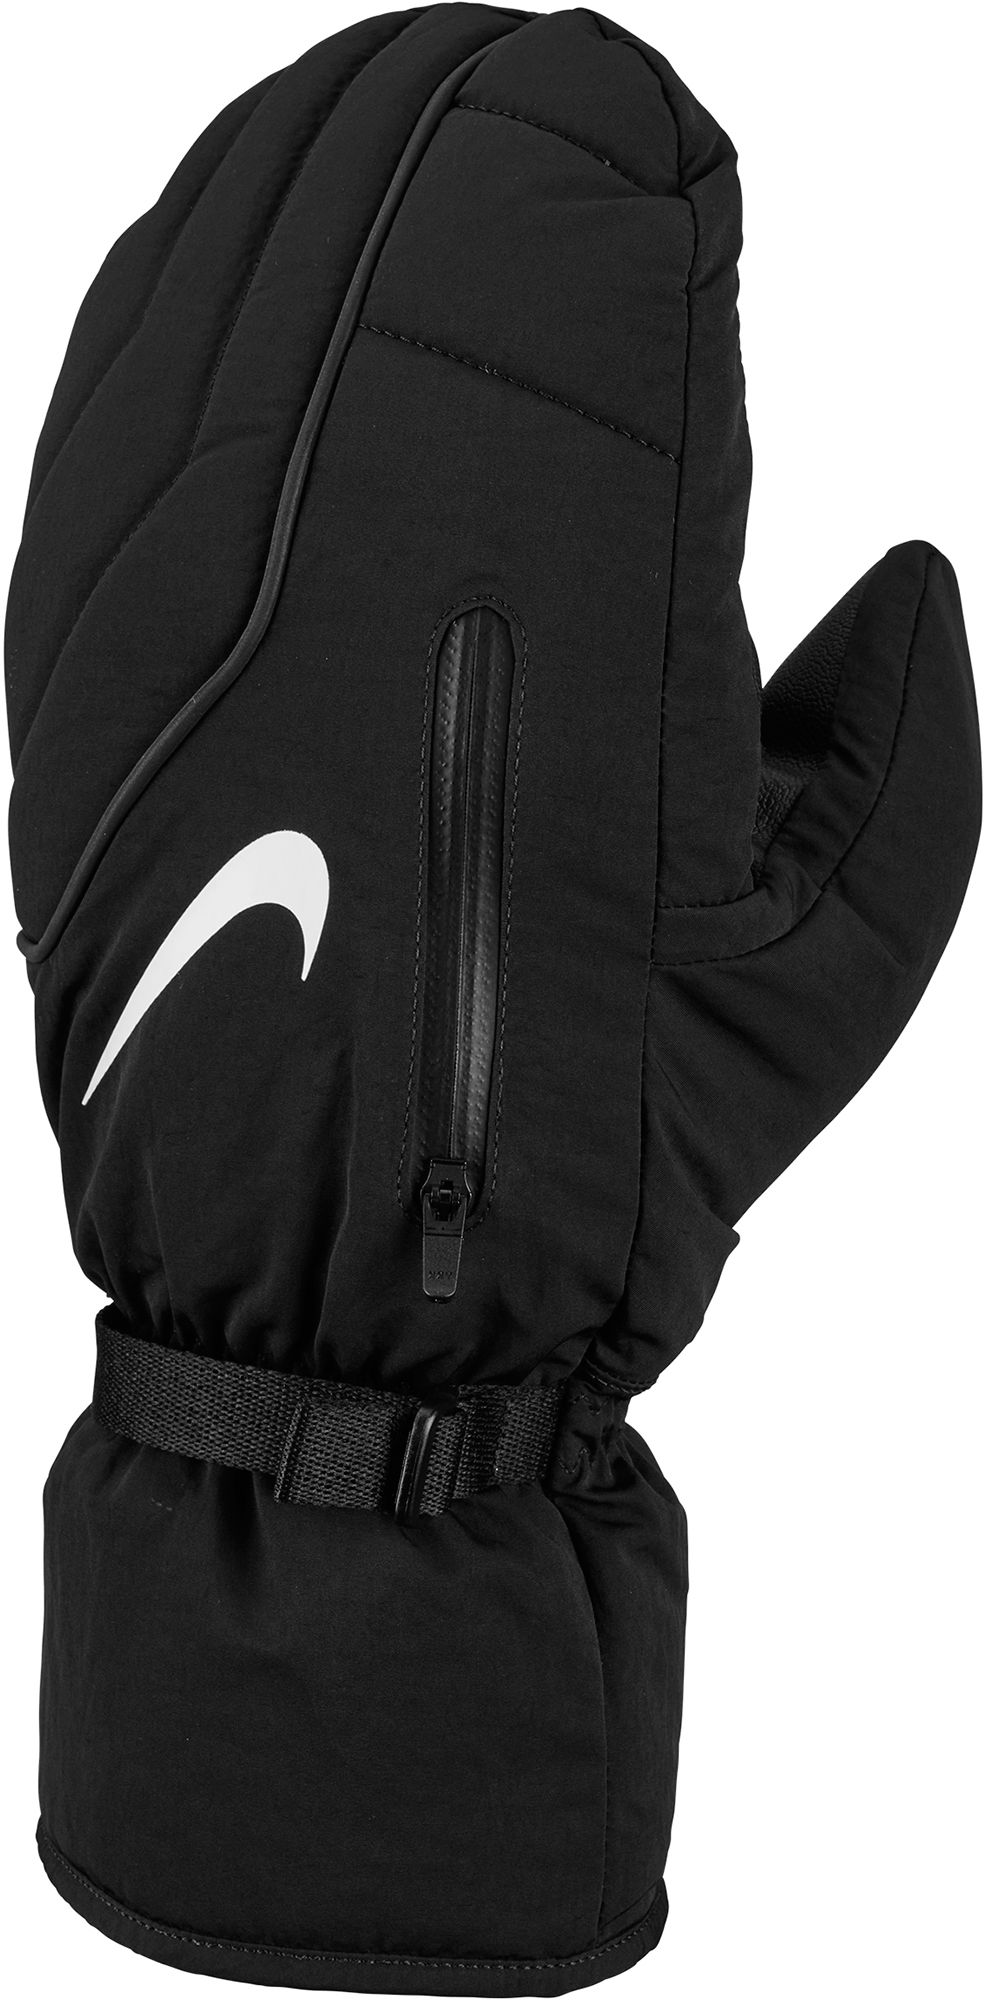 Nike Therma-Fit Golf Cart Mittens